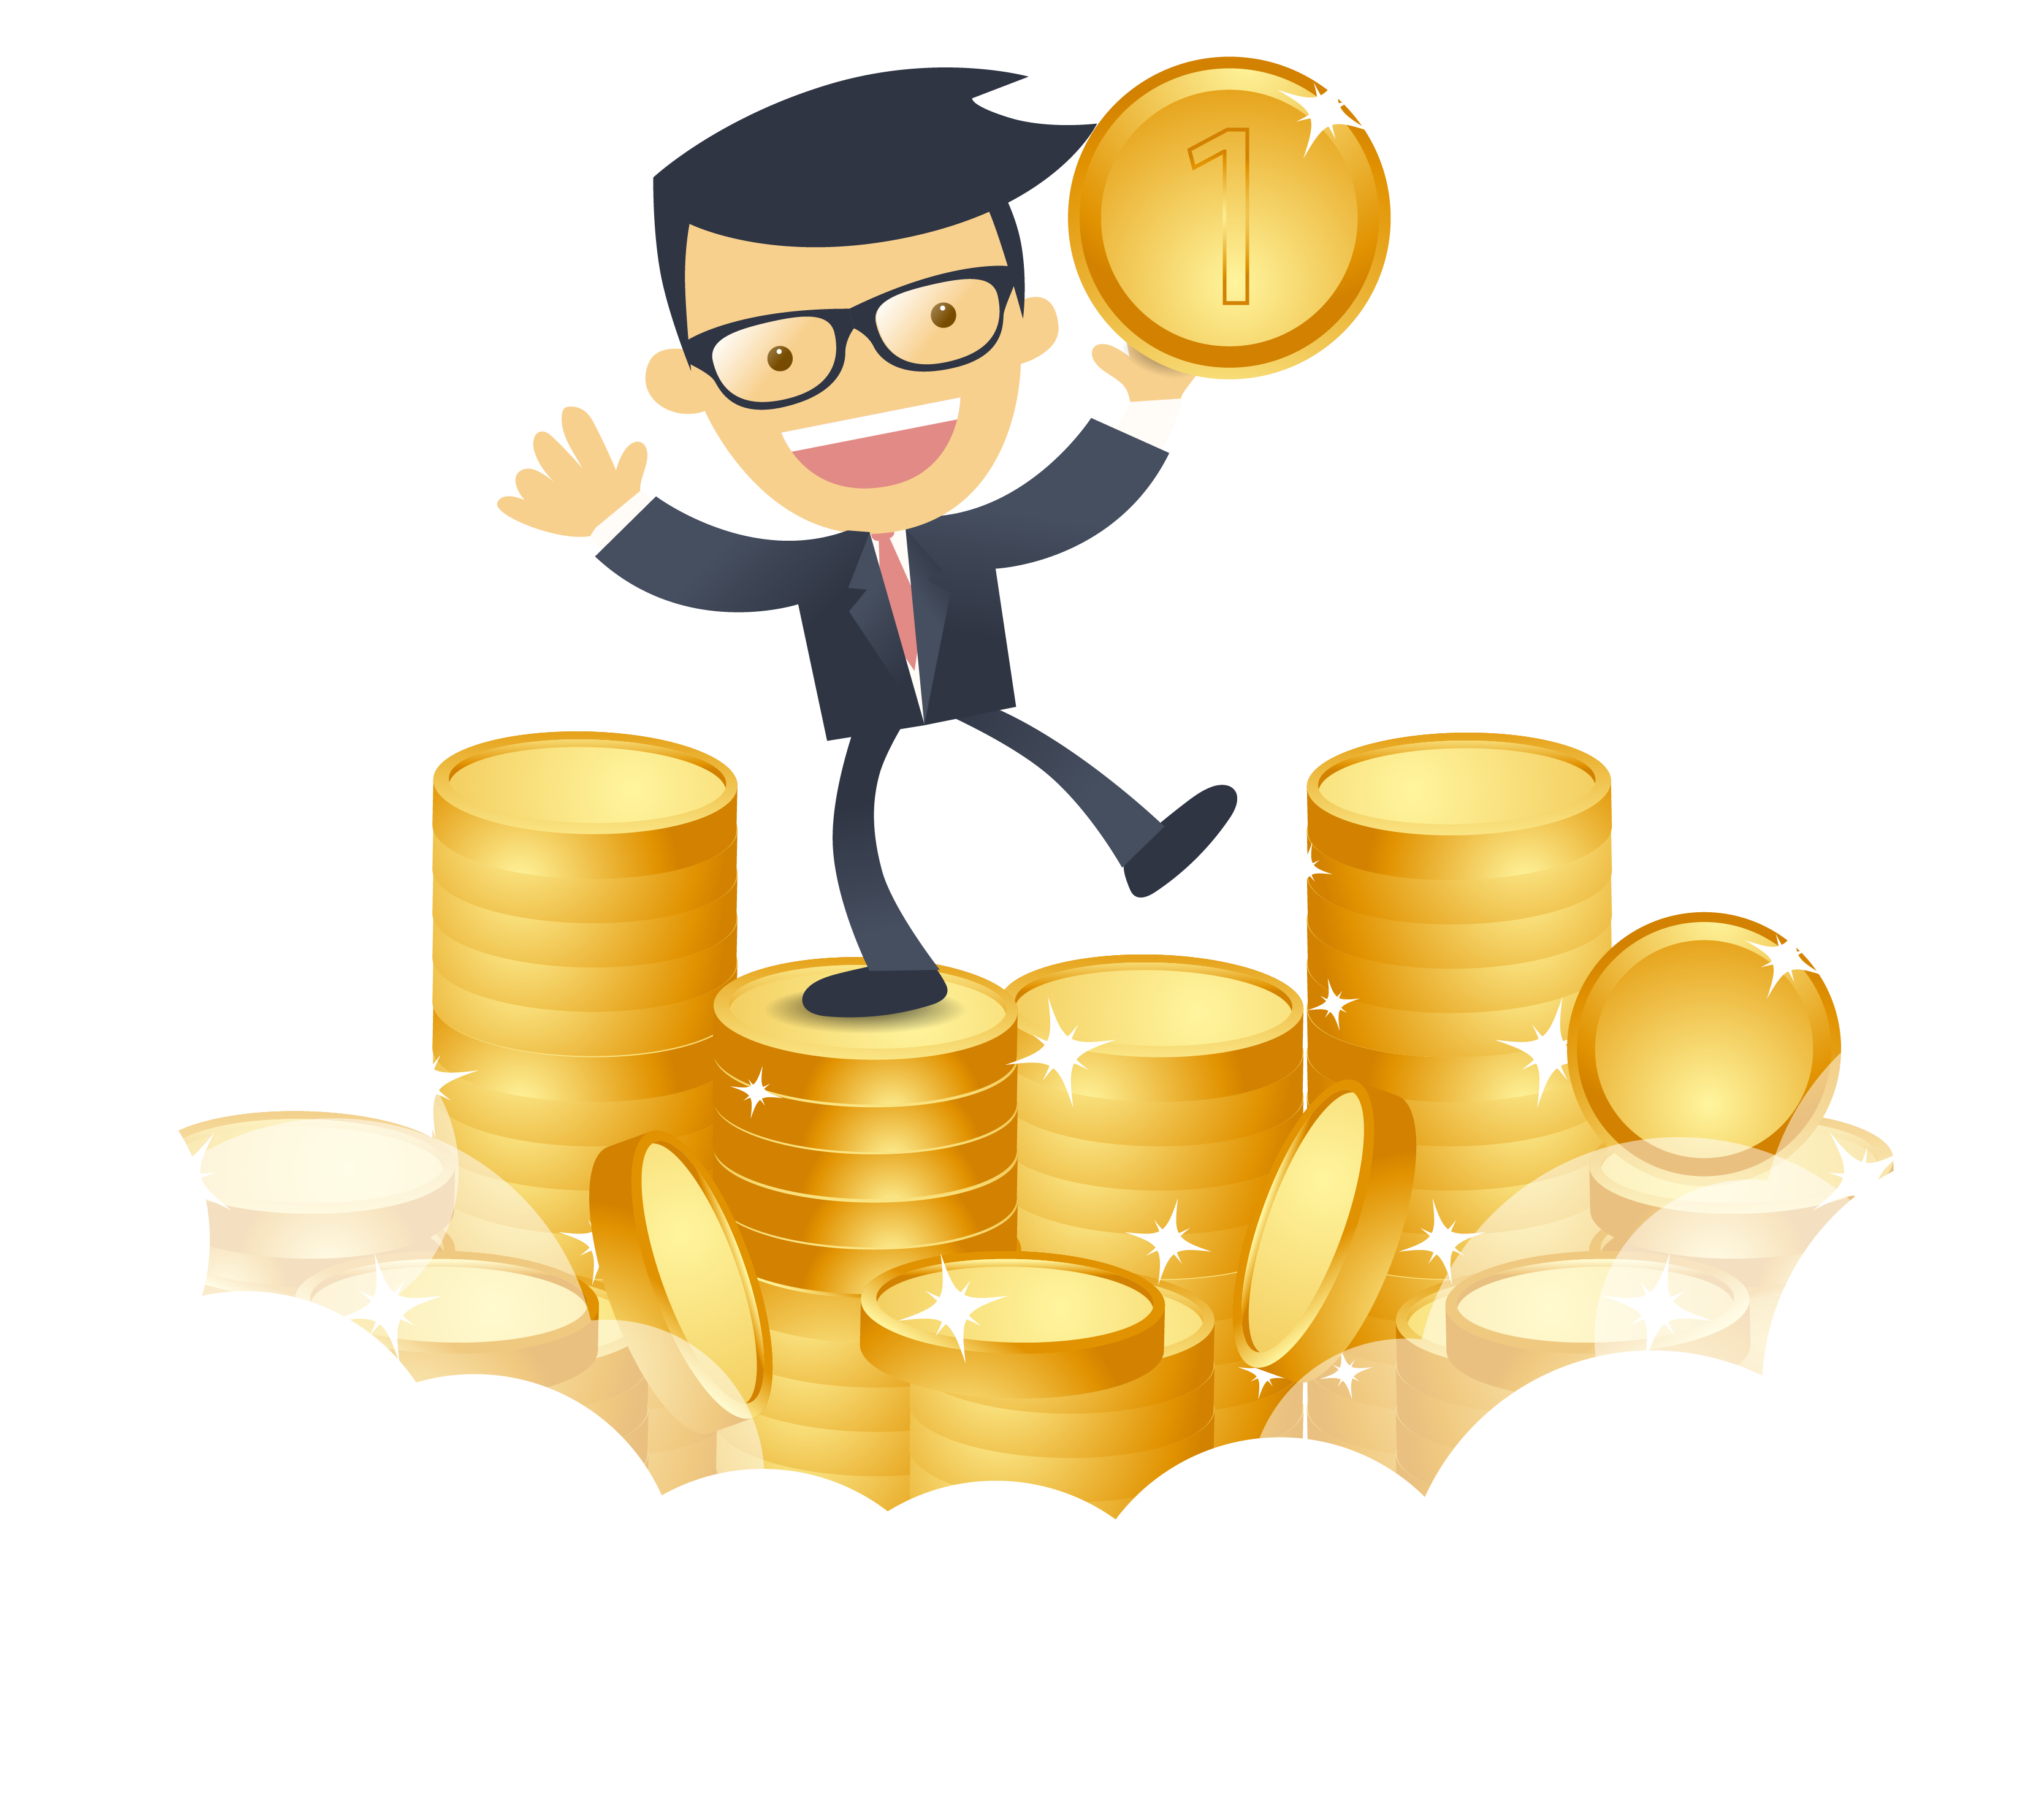 Download Cartoon Happy Businessman With Money Vector 3334 - Work Hard Earn  Money PNG Image with No Background 